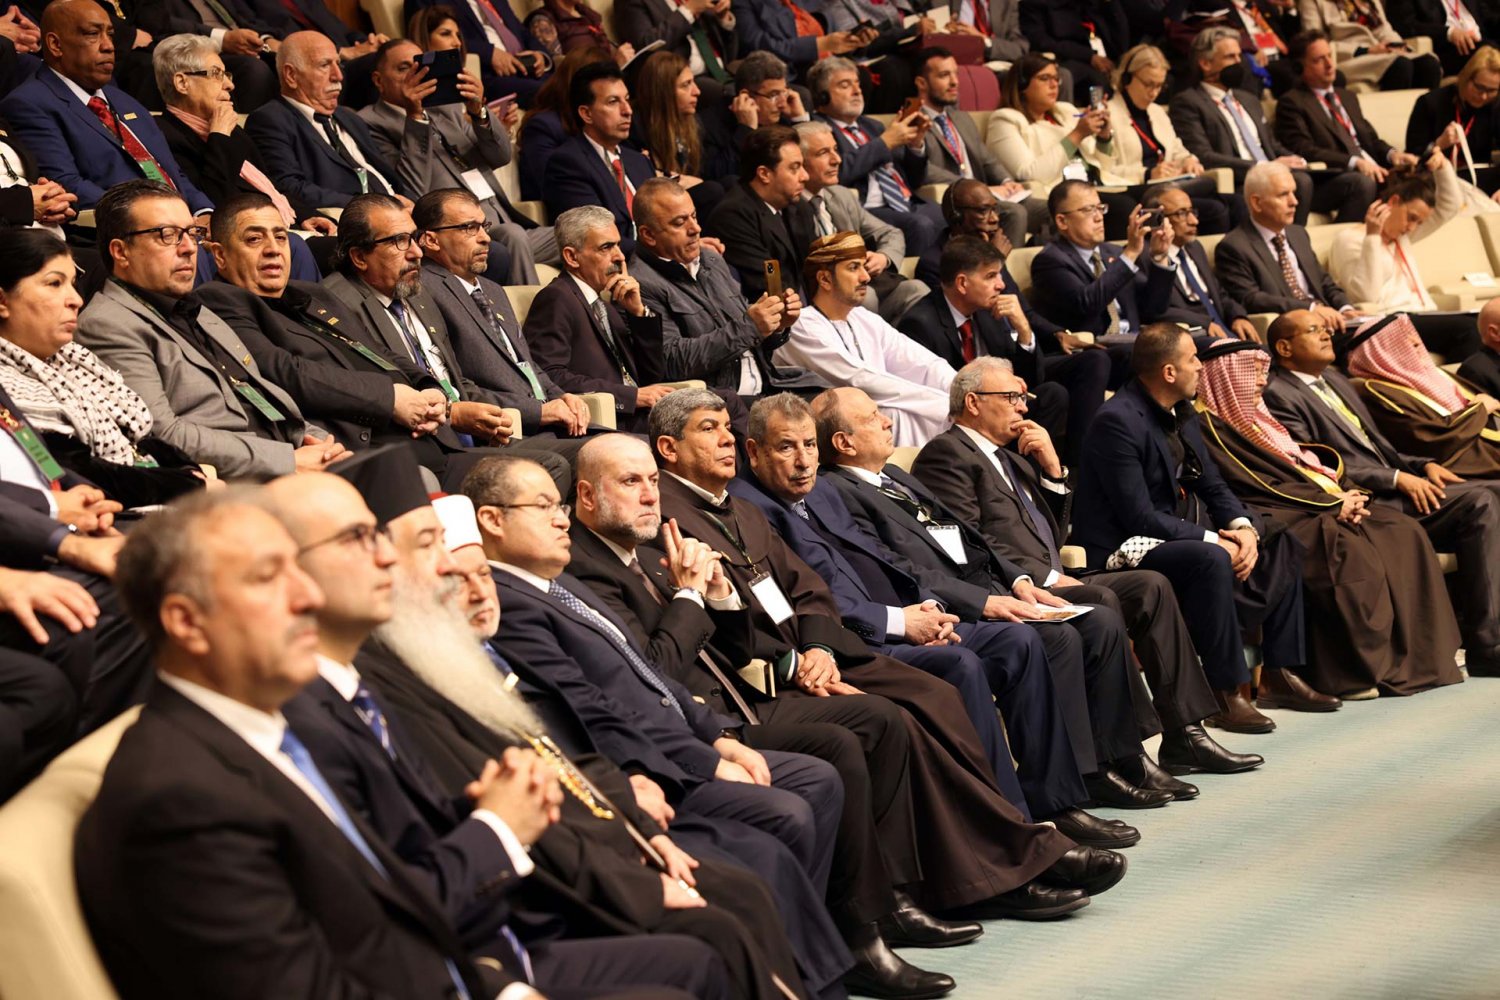 The audience listens attentively at the Arab League conference, "In Support of Jerusalem."